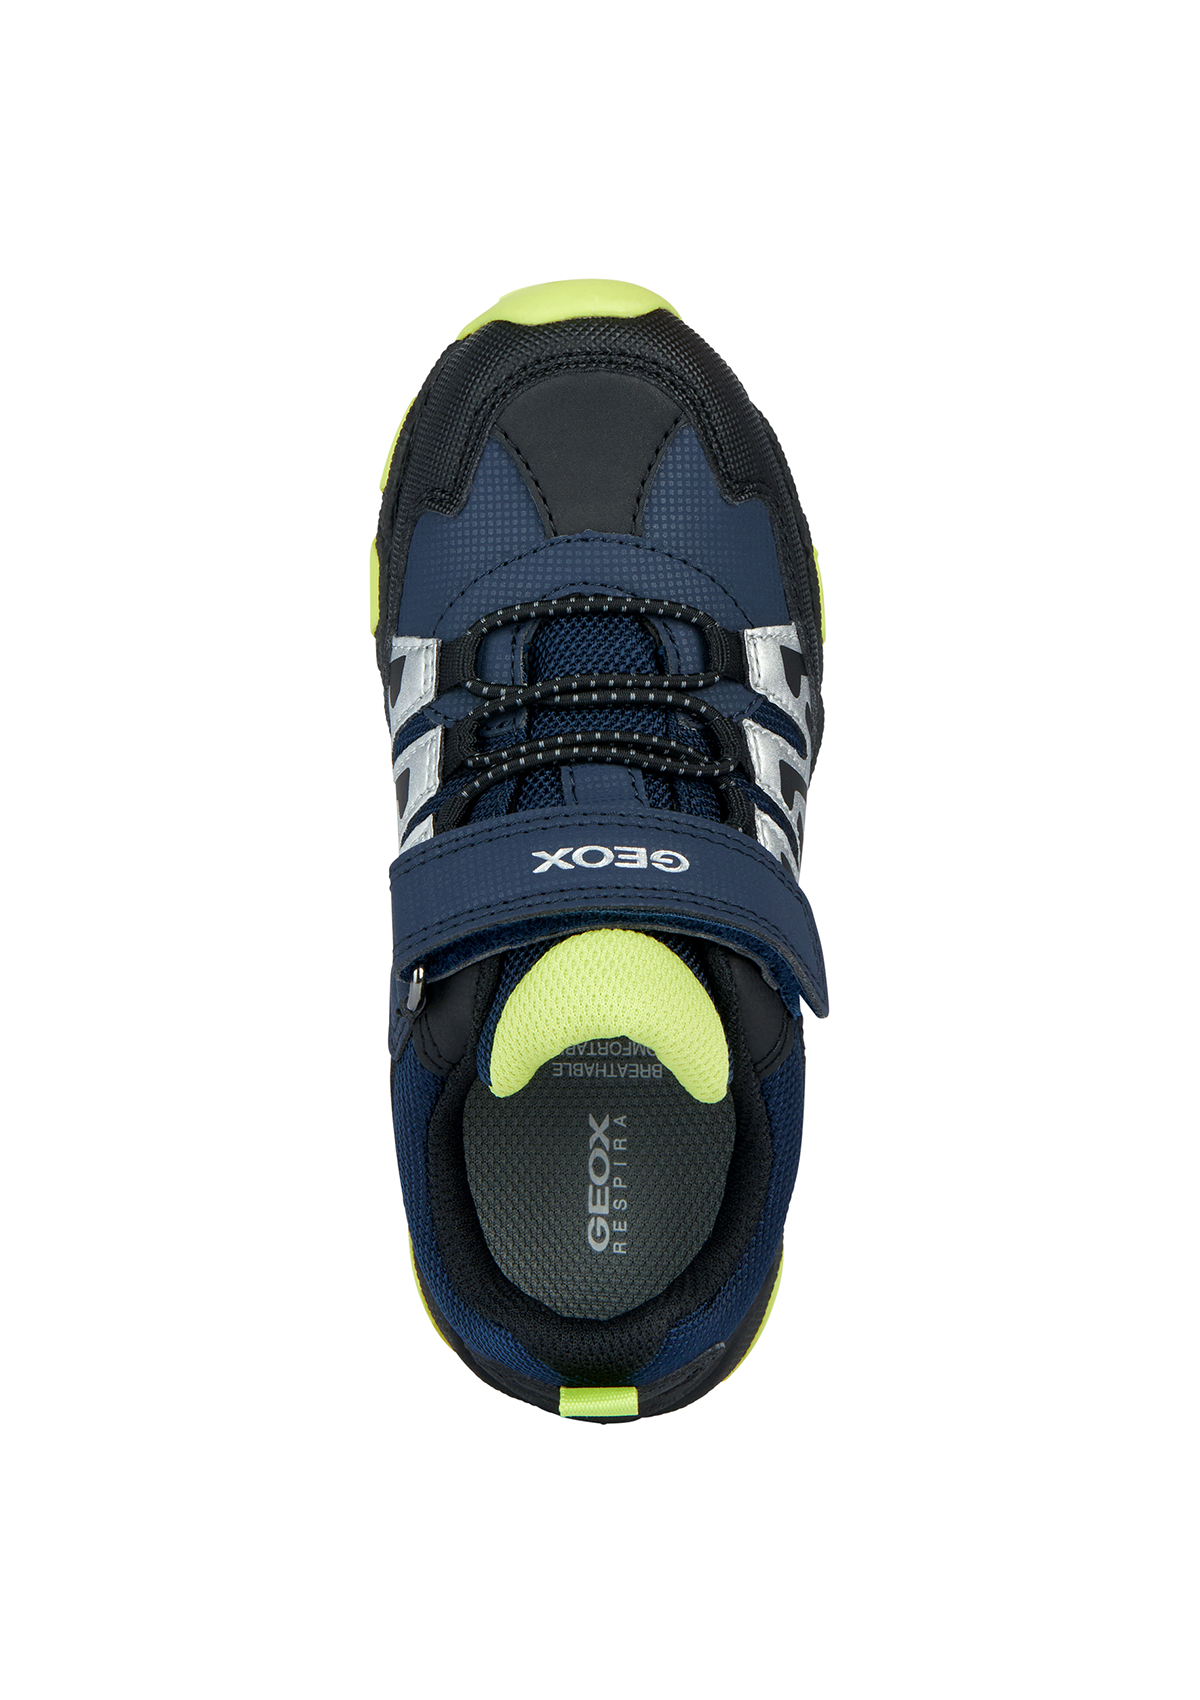 Geox Boys Trainers Magnetar Navy Lime '23